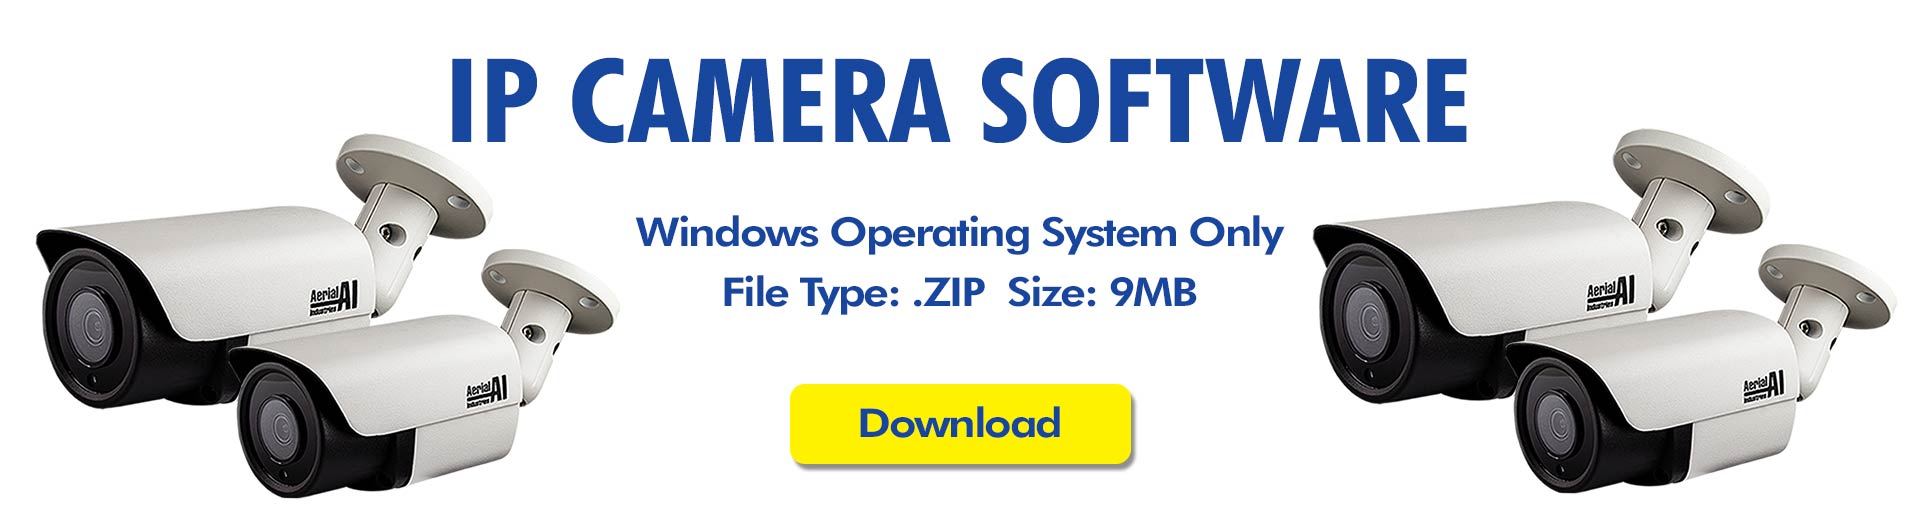 Click here to Download the Aerial Industries IP Camera Software (WINDOWS ONLY)